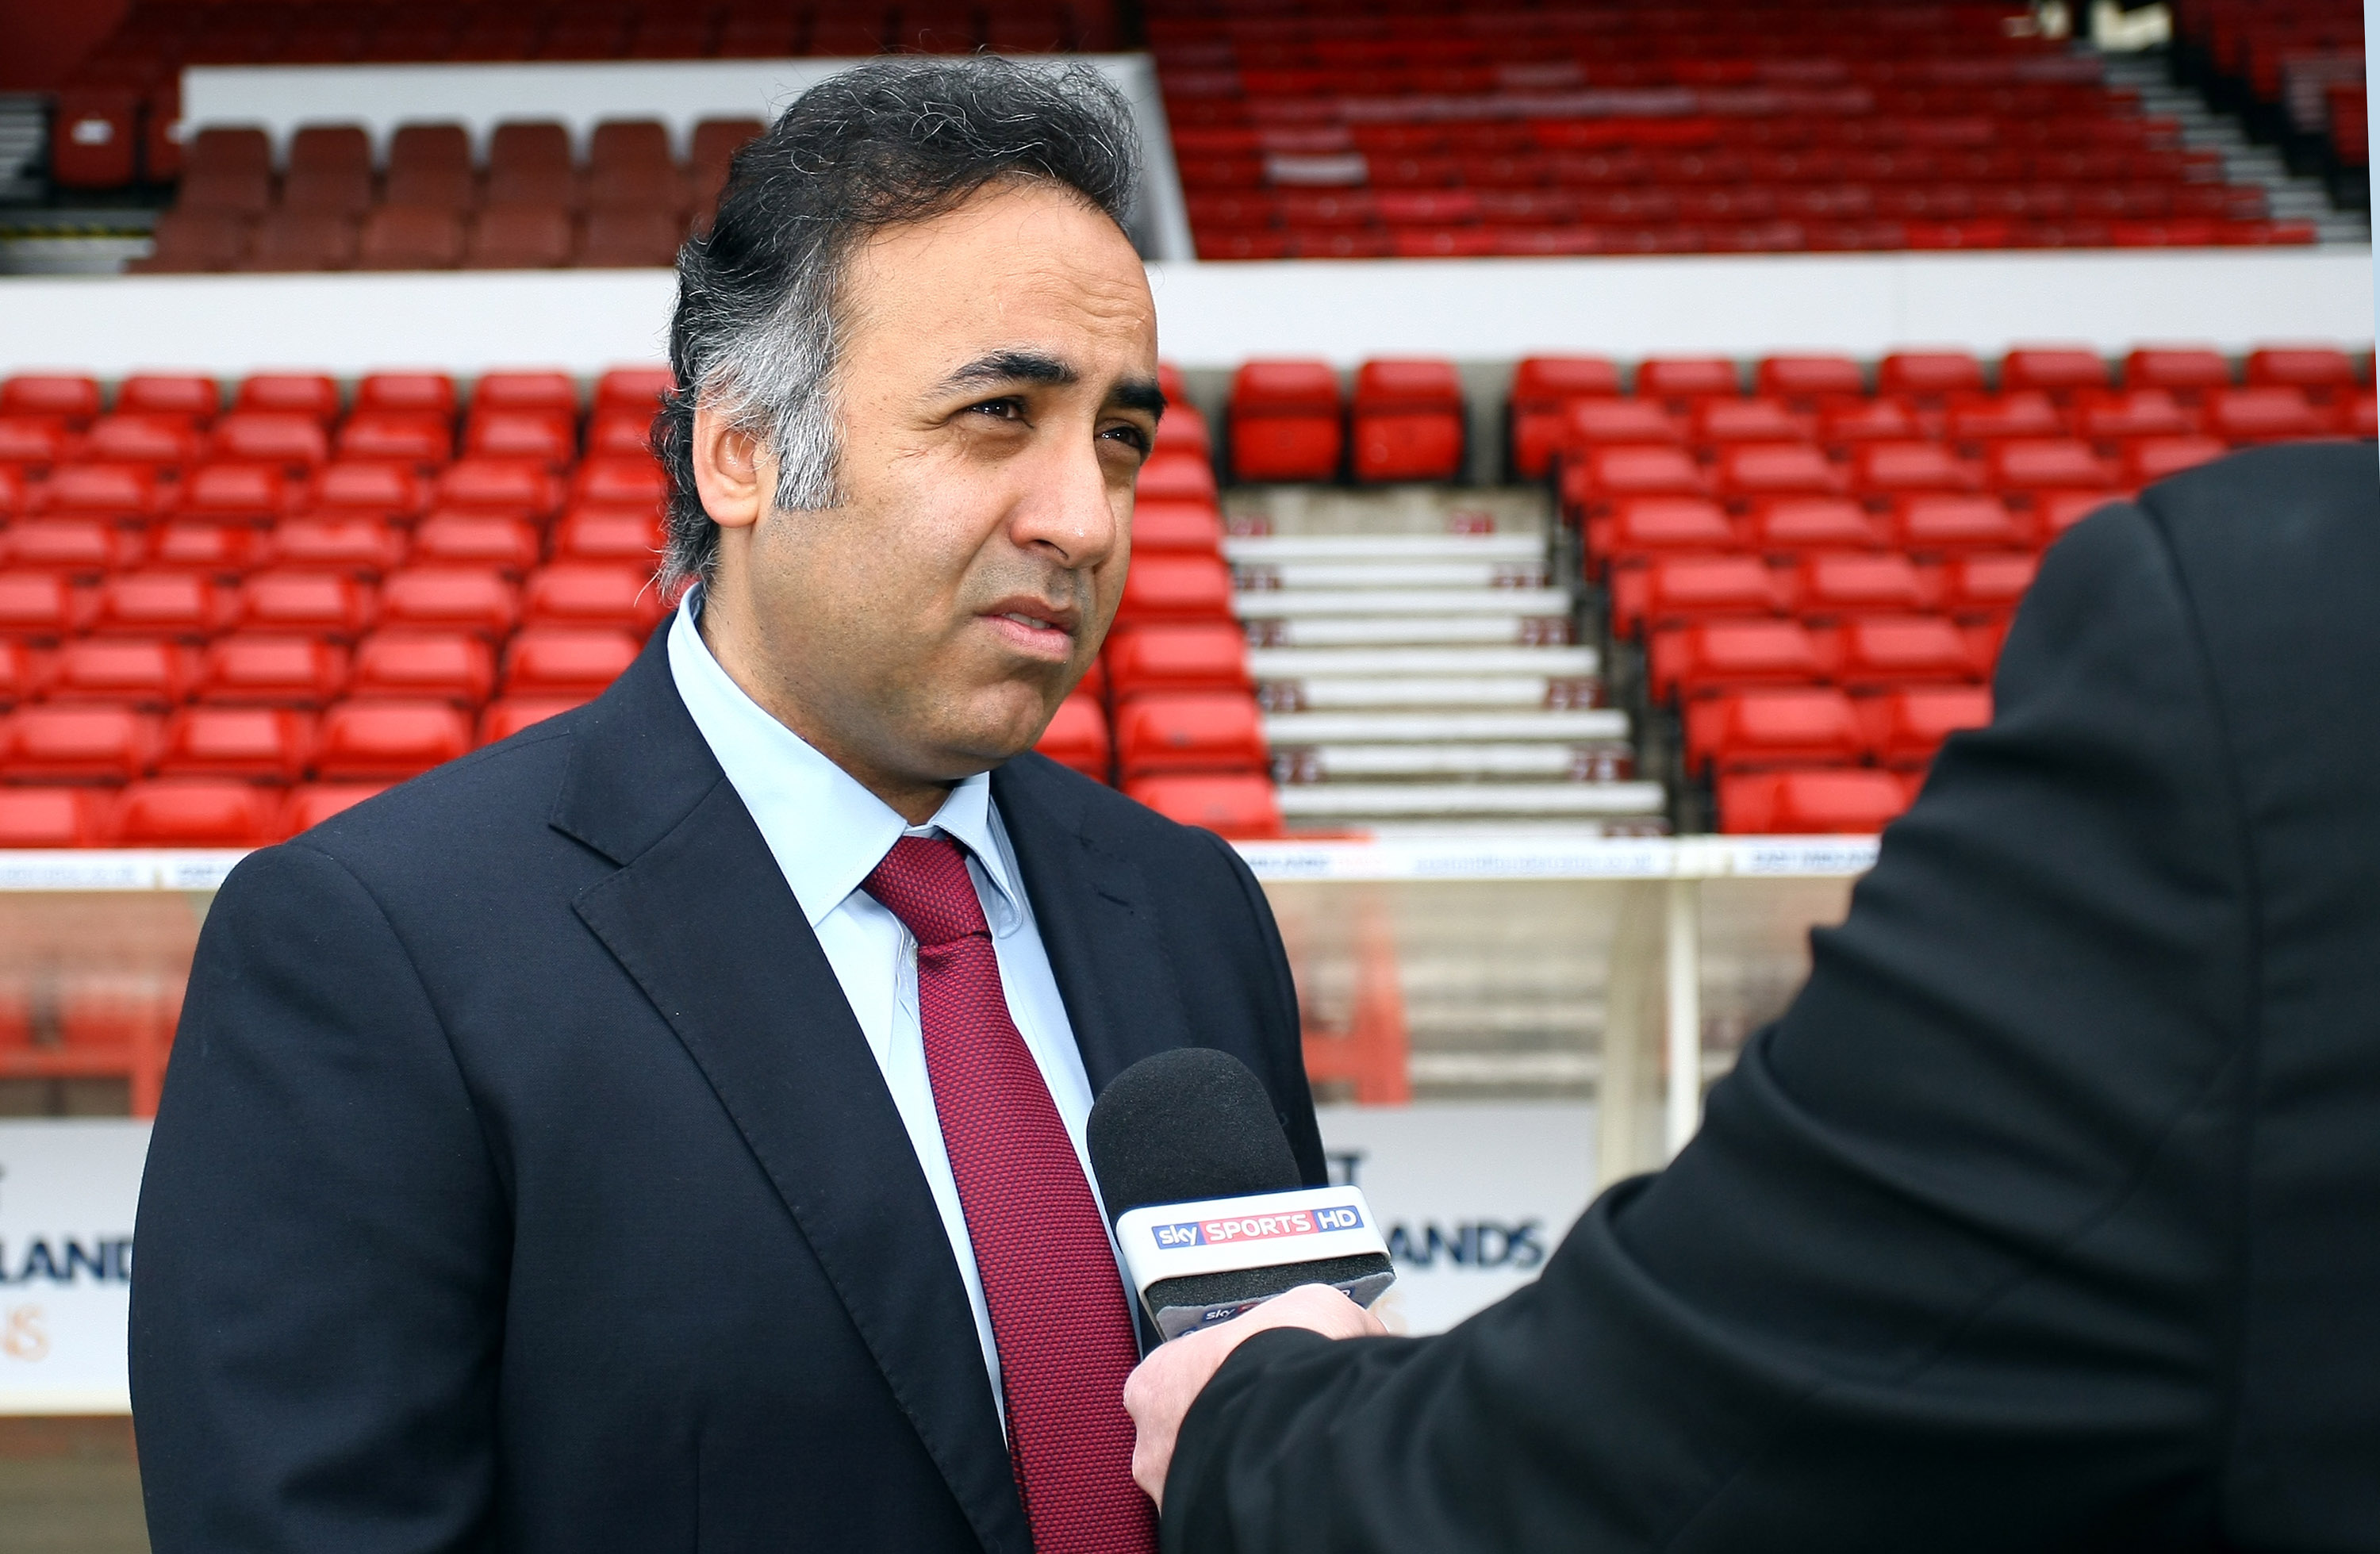 NOTTINGHAM, ENGLAND - APRIL 03: Nottingham Forest Chairman Fawaz Al Hasawi is interviewed pitch side after Stuart Pearce was unveiled as the new Nottingham Forest Manager at the City Ground on April 03, 2014 in Nottingham, England.  (Photo by Dan Westwell/Getty Images)